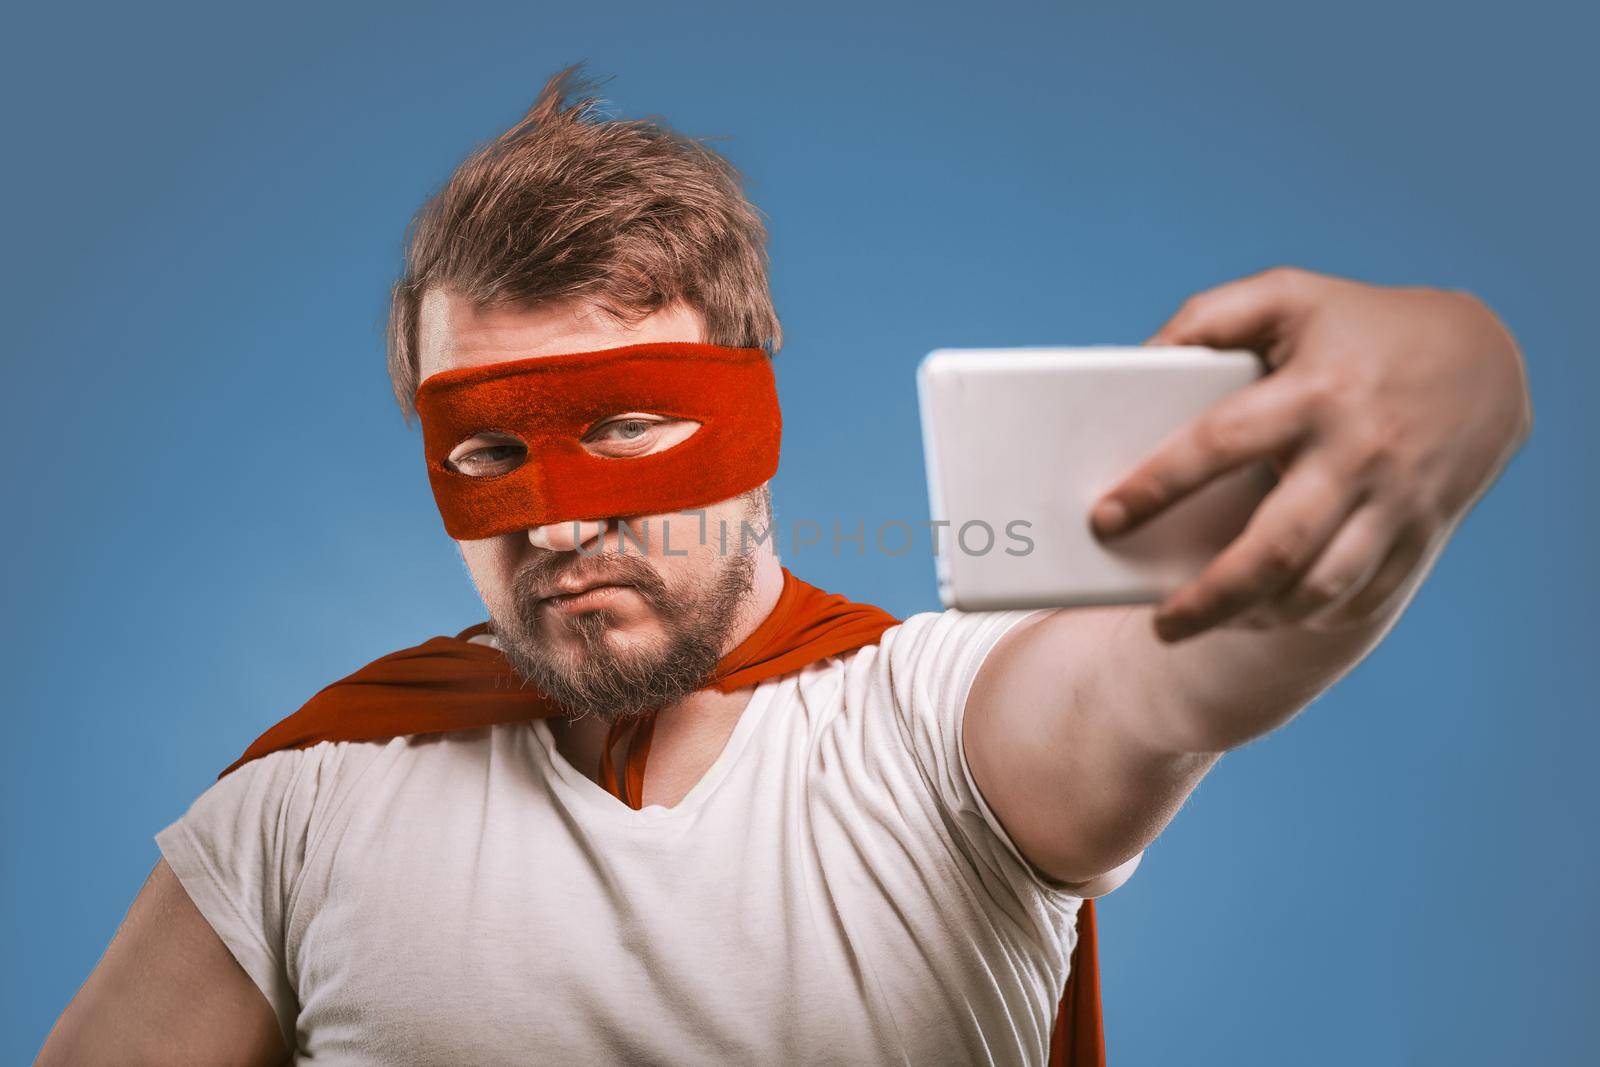 Super hero man takes selfie by mobile phones. Confident man in a super hero costume in a red mask and cloak poses on faded denim blue background making selfie photos on smartphone.